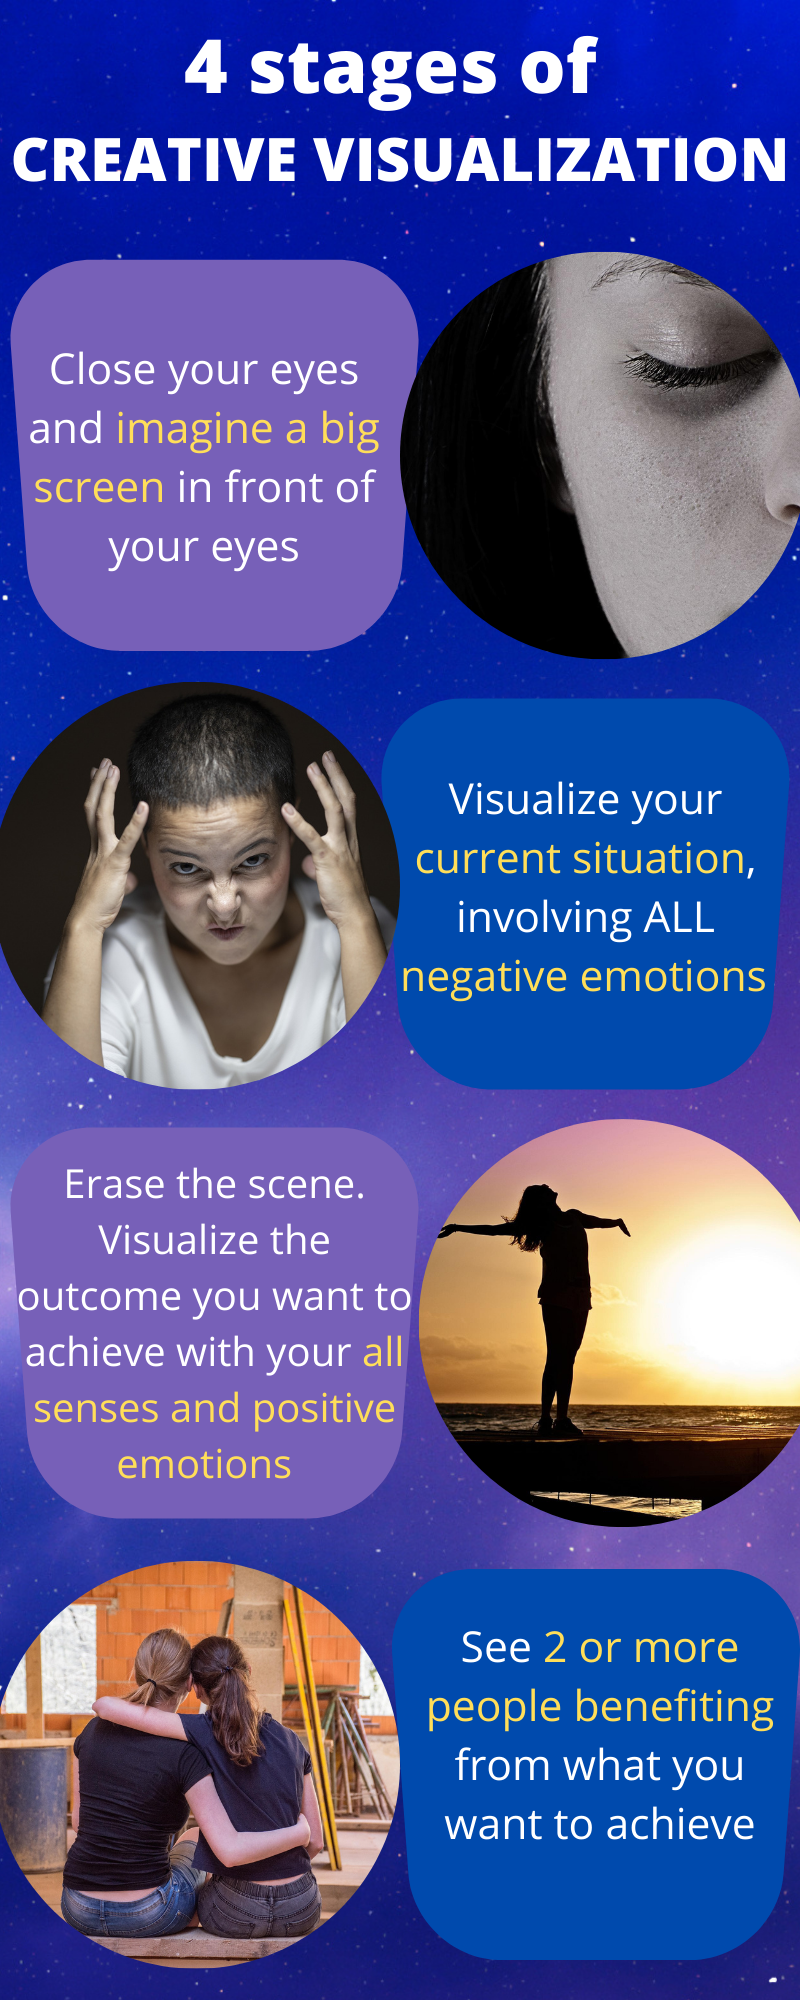 4 stages of CREATIVE VISUALIZATION